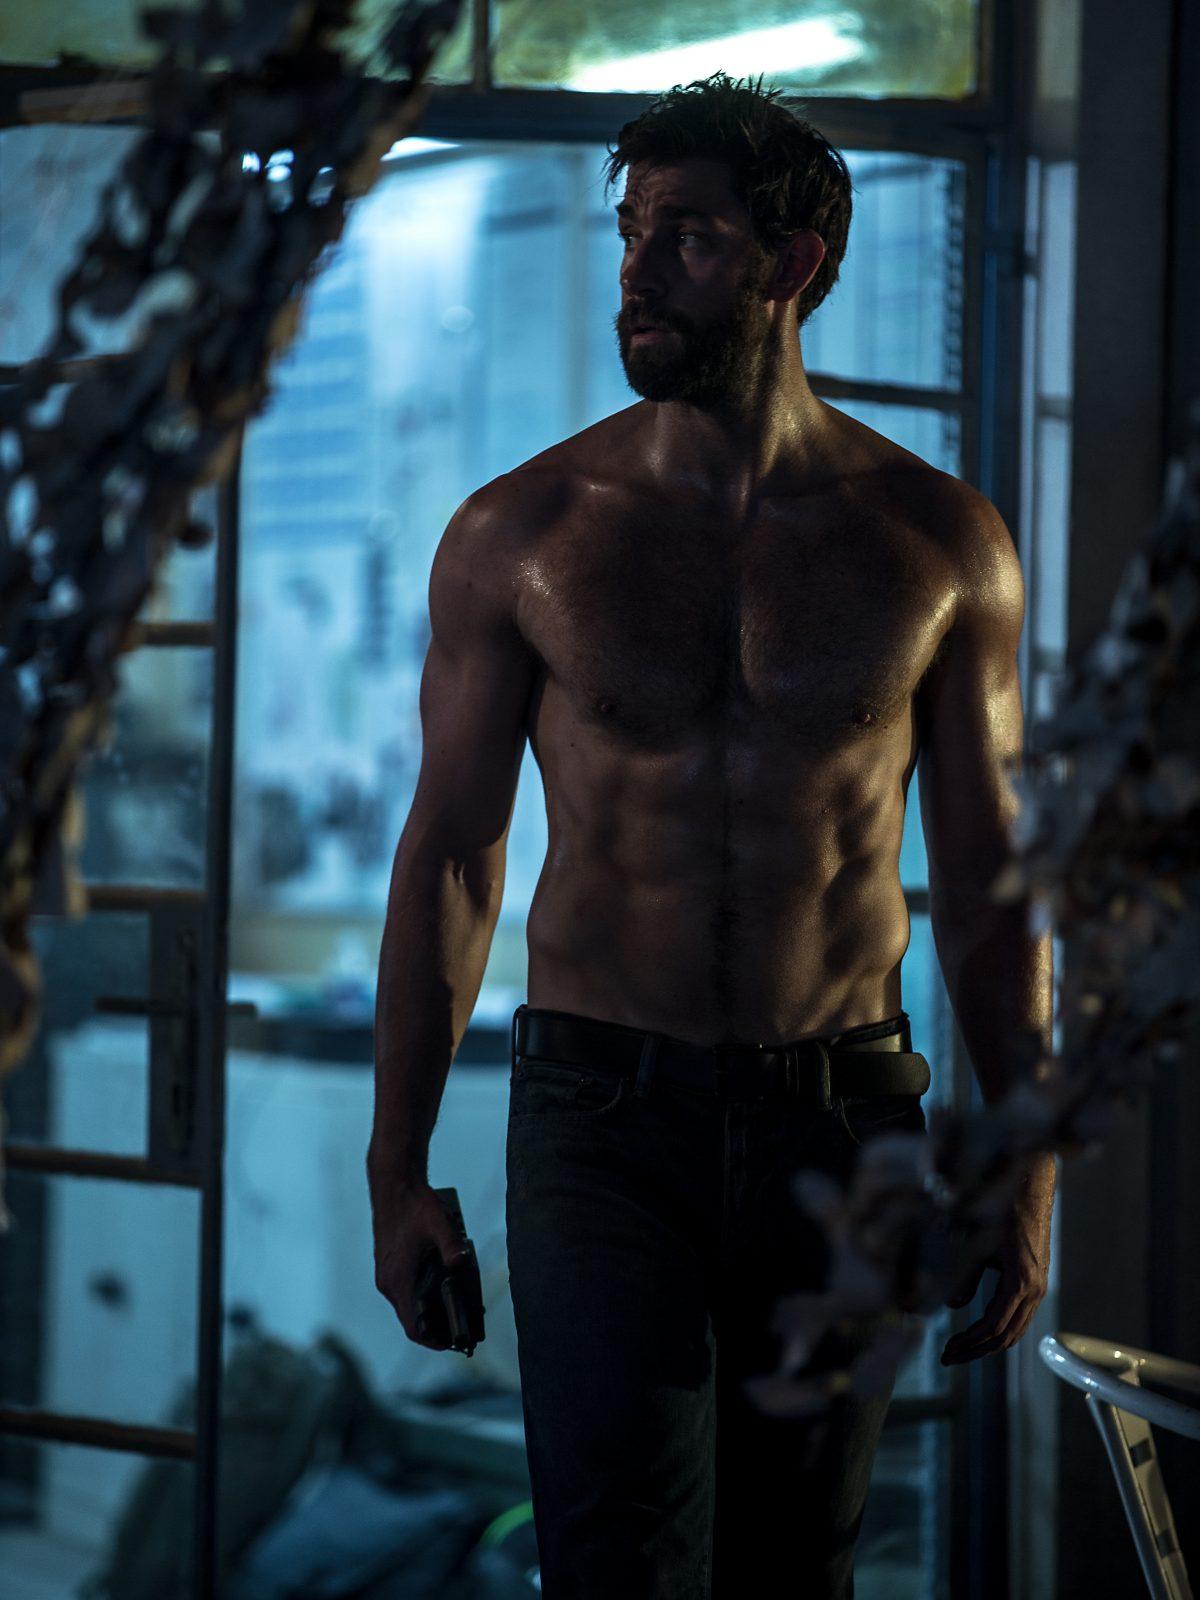 John Krasinski got ripped to play Navy SEAL Jack Silva in "13 Hours: The Secret Soldiers of Benghazi." (Paramount Pictures/3 Arts Entertainment/Bay Films